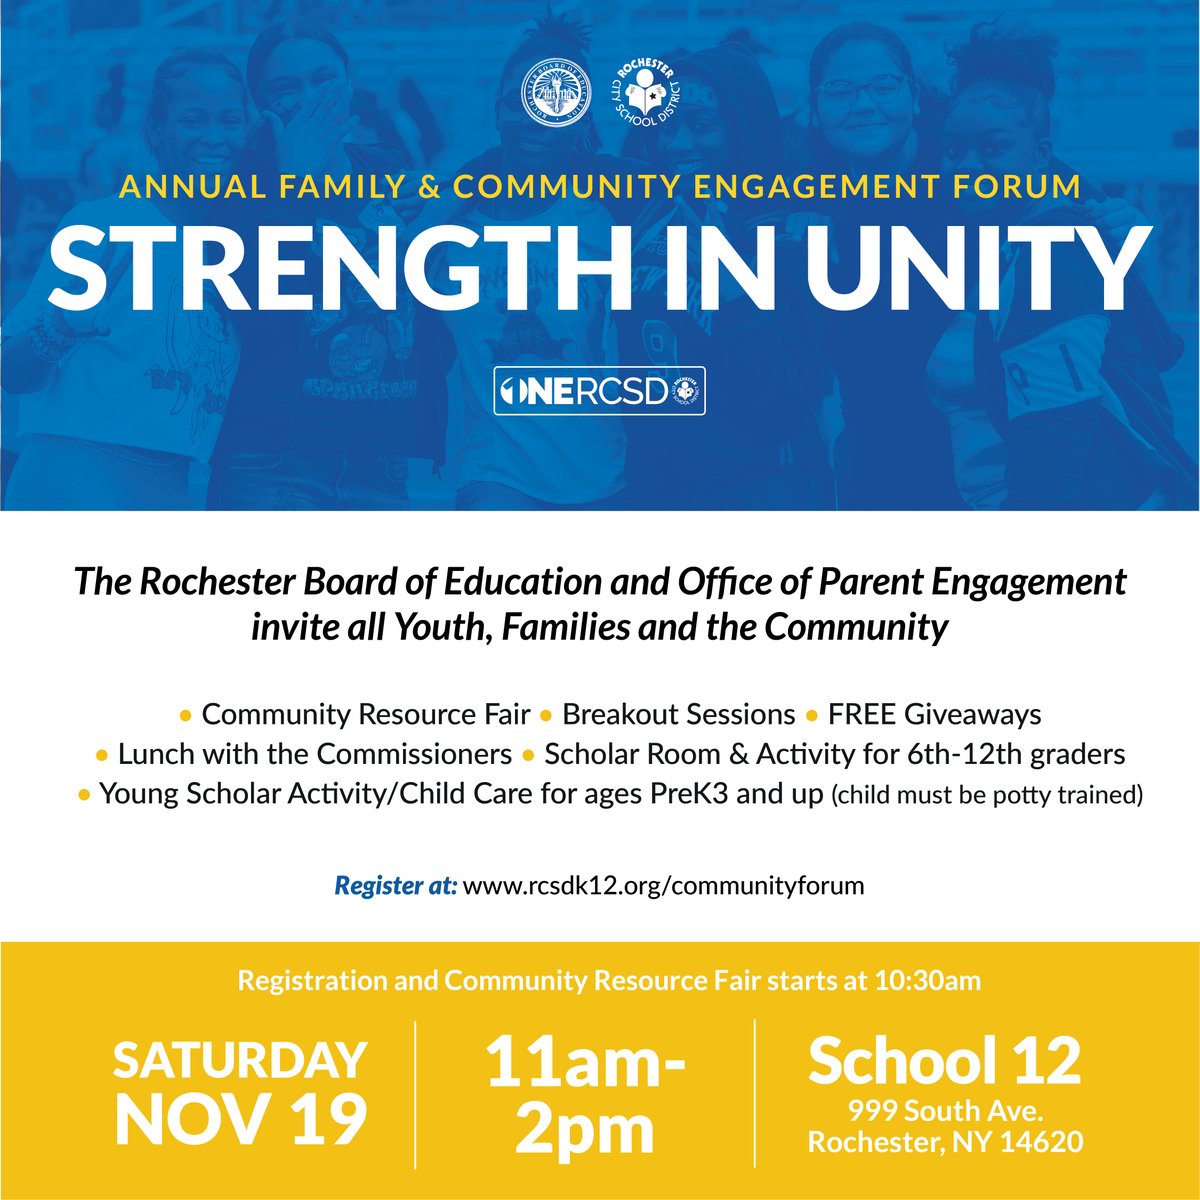 The Rochester Board of Education and Office of Parent Engagement are hosting a family and community engagement forum on Saturday, November 19, from 11:00 a.m. - 2:00 p.m. at @RCSDAMDA. Visit the link for more details, including registration rcsdk12.org/communityforum #ONERCSD